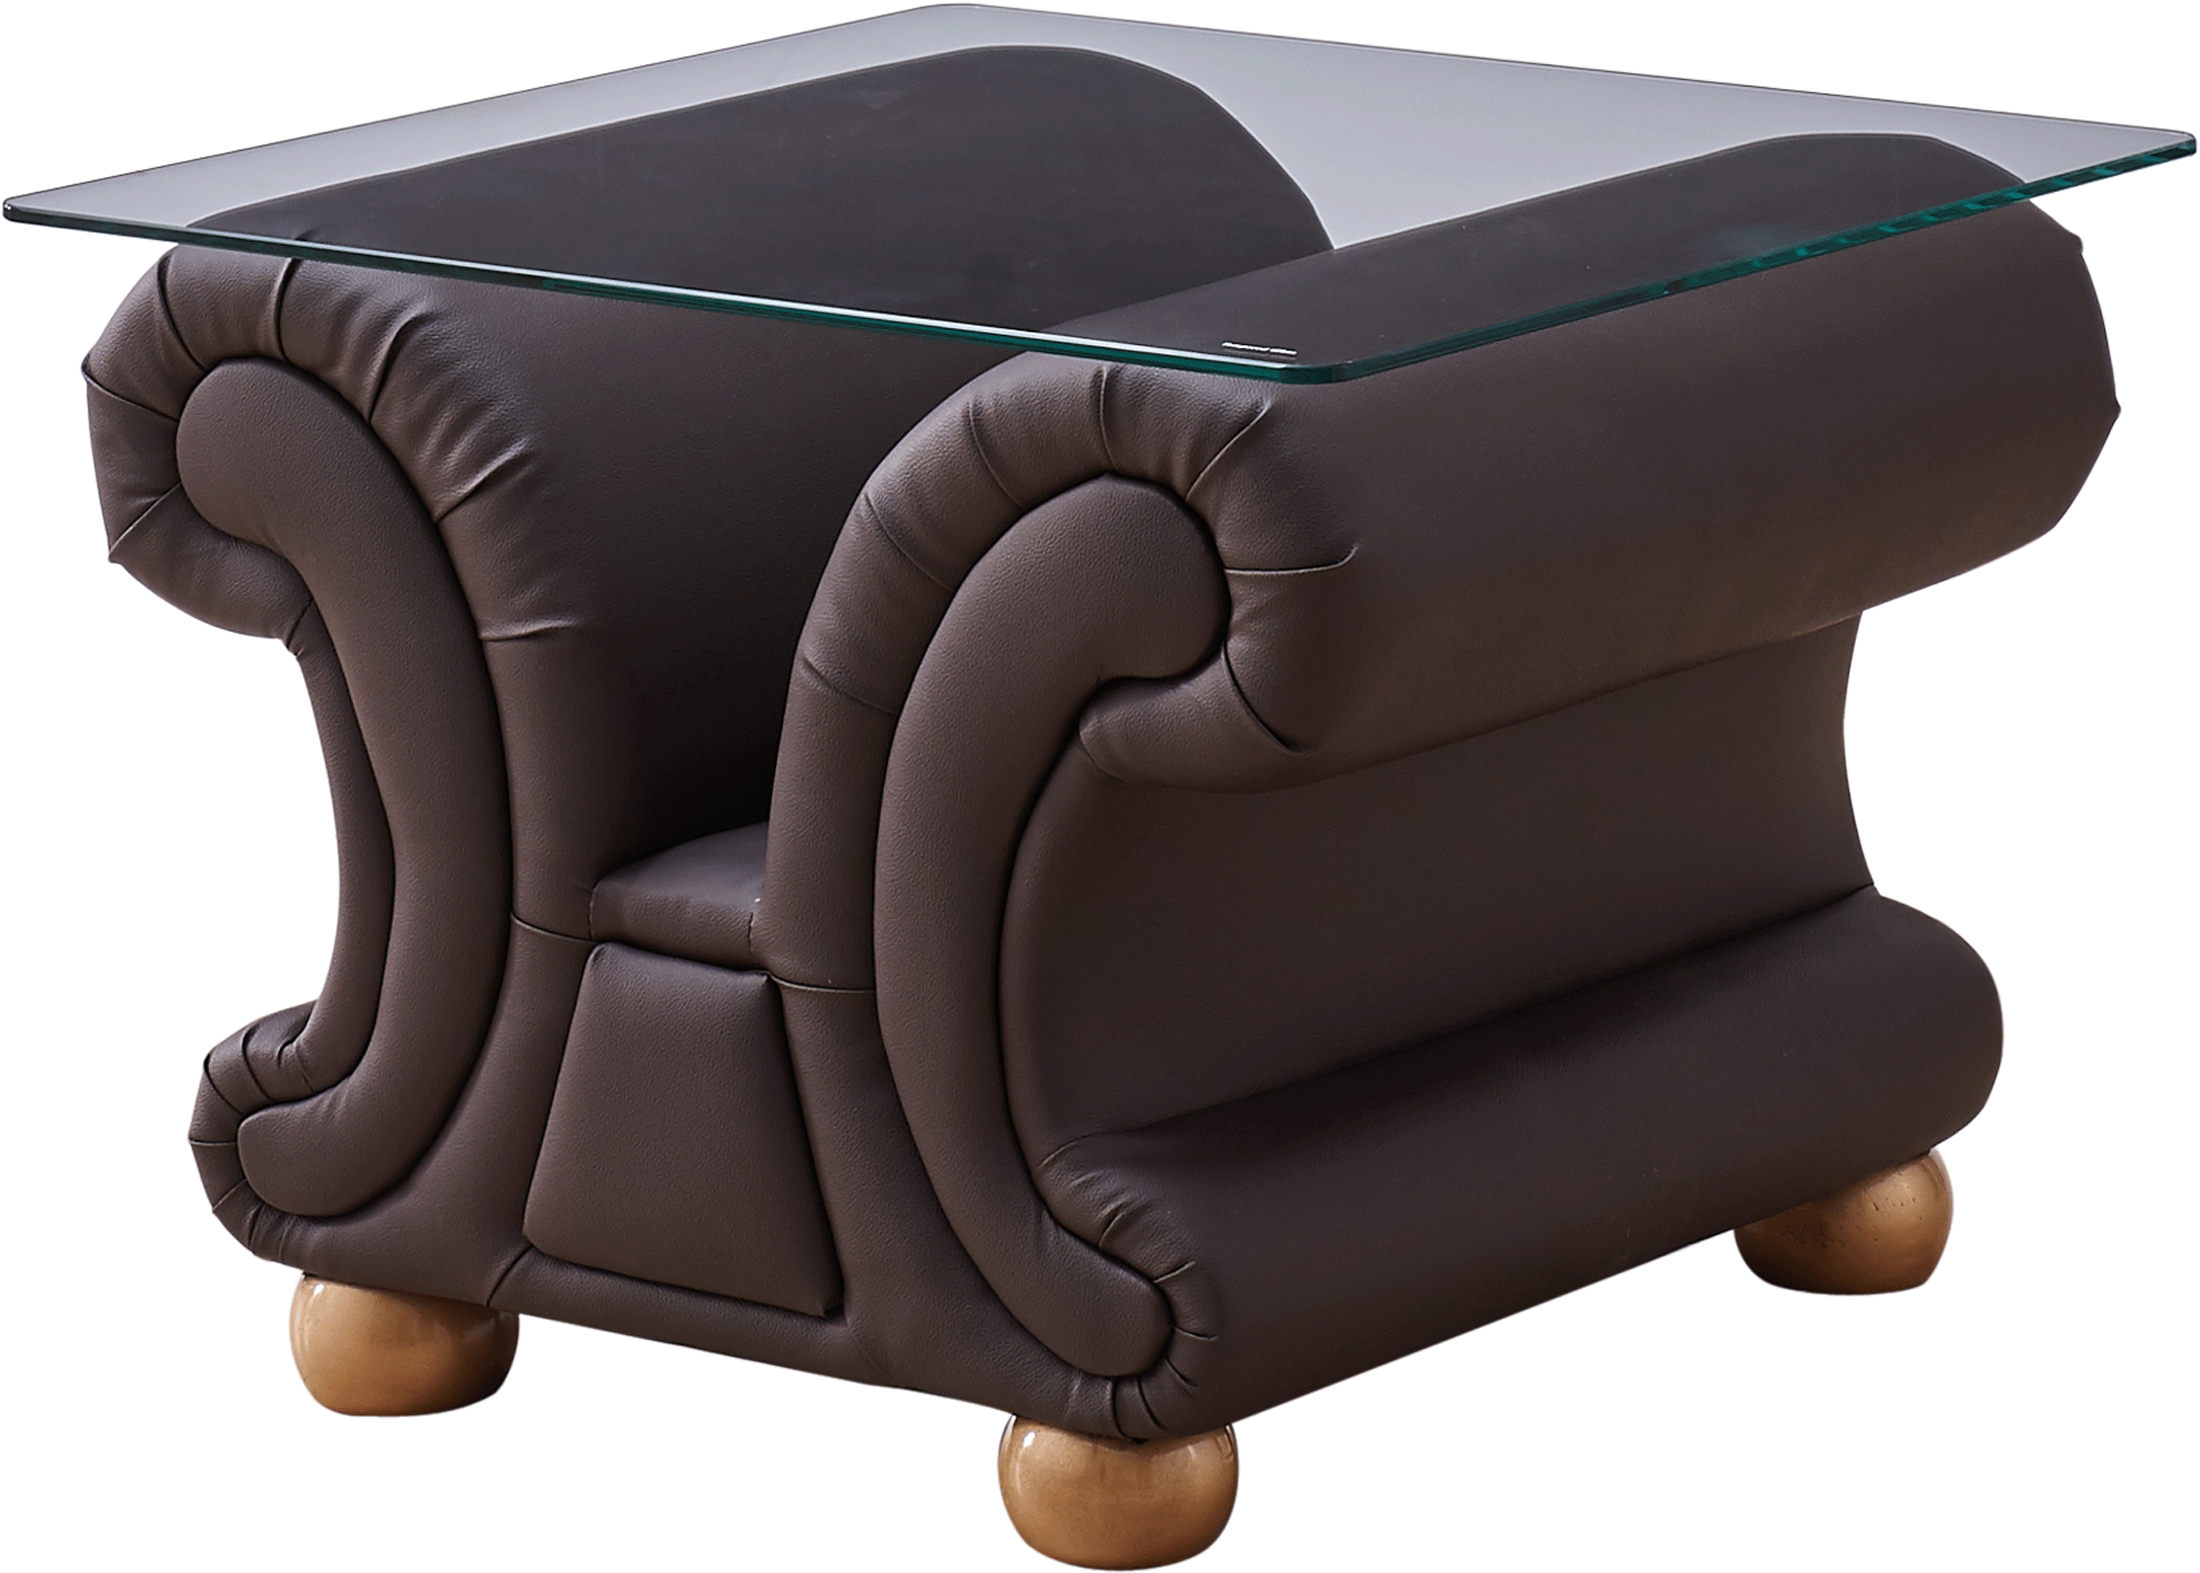 Brands Fama Modern Living Room, Spain Apolo Brown End table